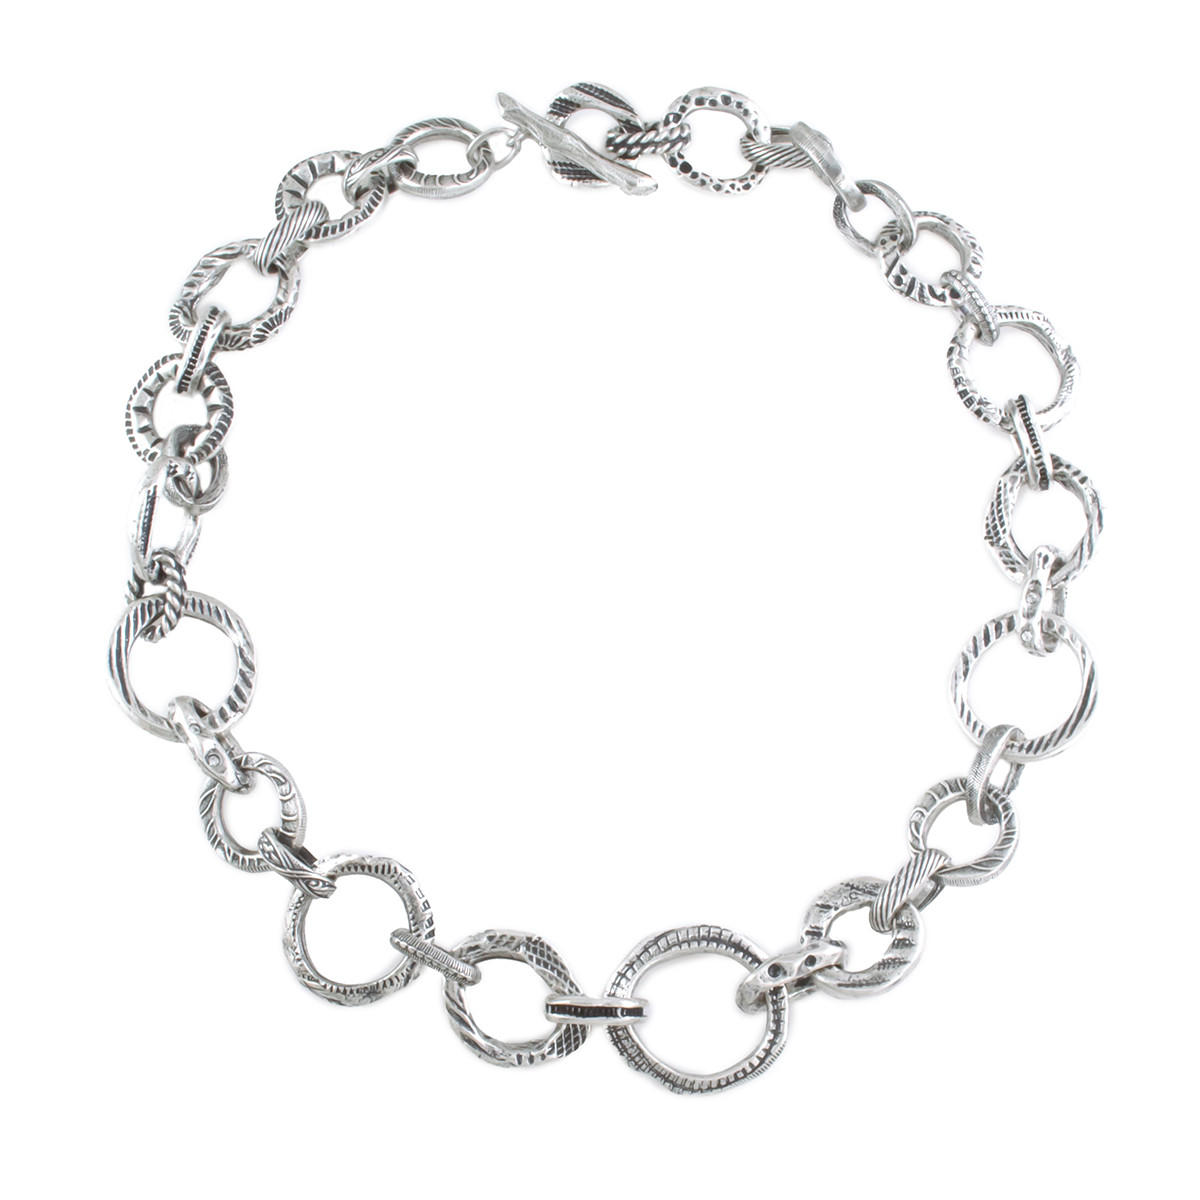 Locke's Links Necklace in Silver, All Crystal by Patricia Locke I ...